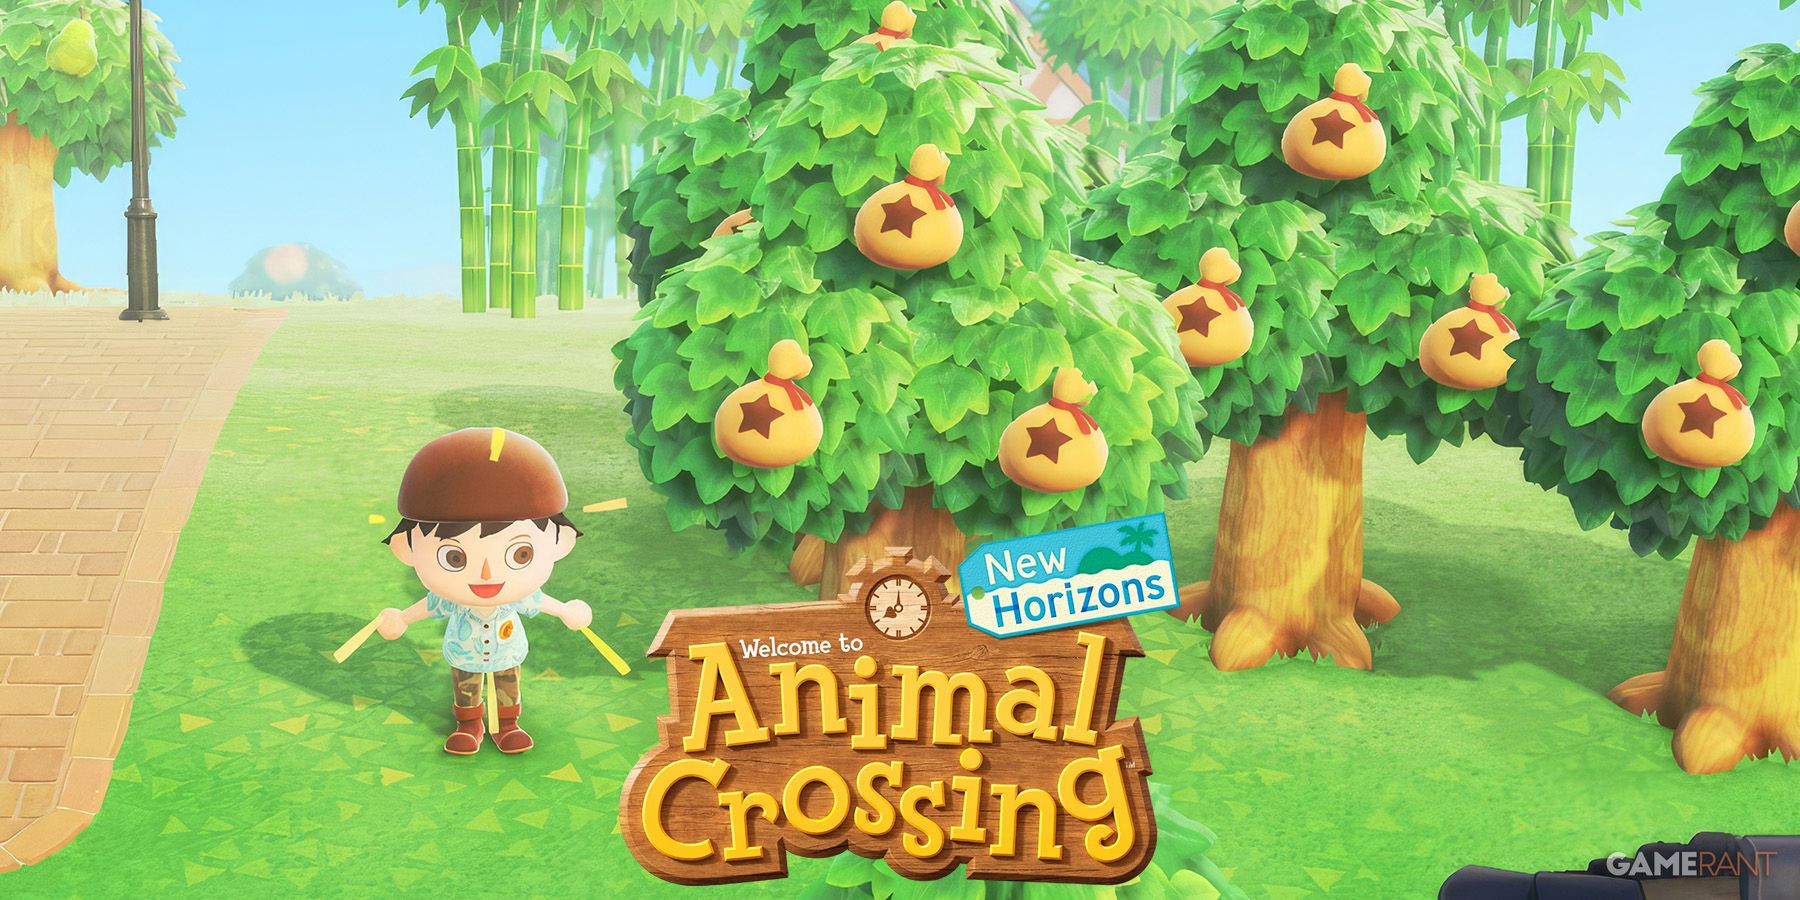 Animal Crossing New Horizons money trees with game logo